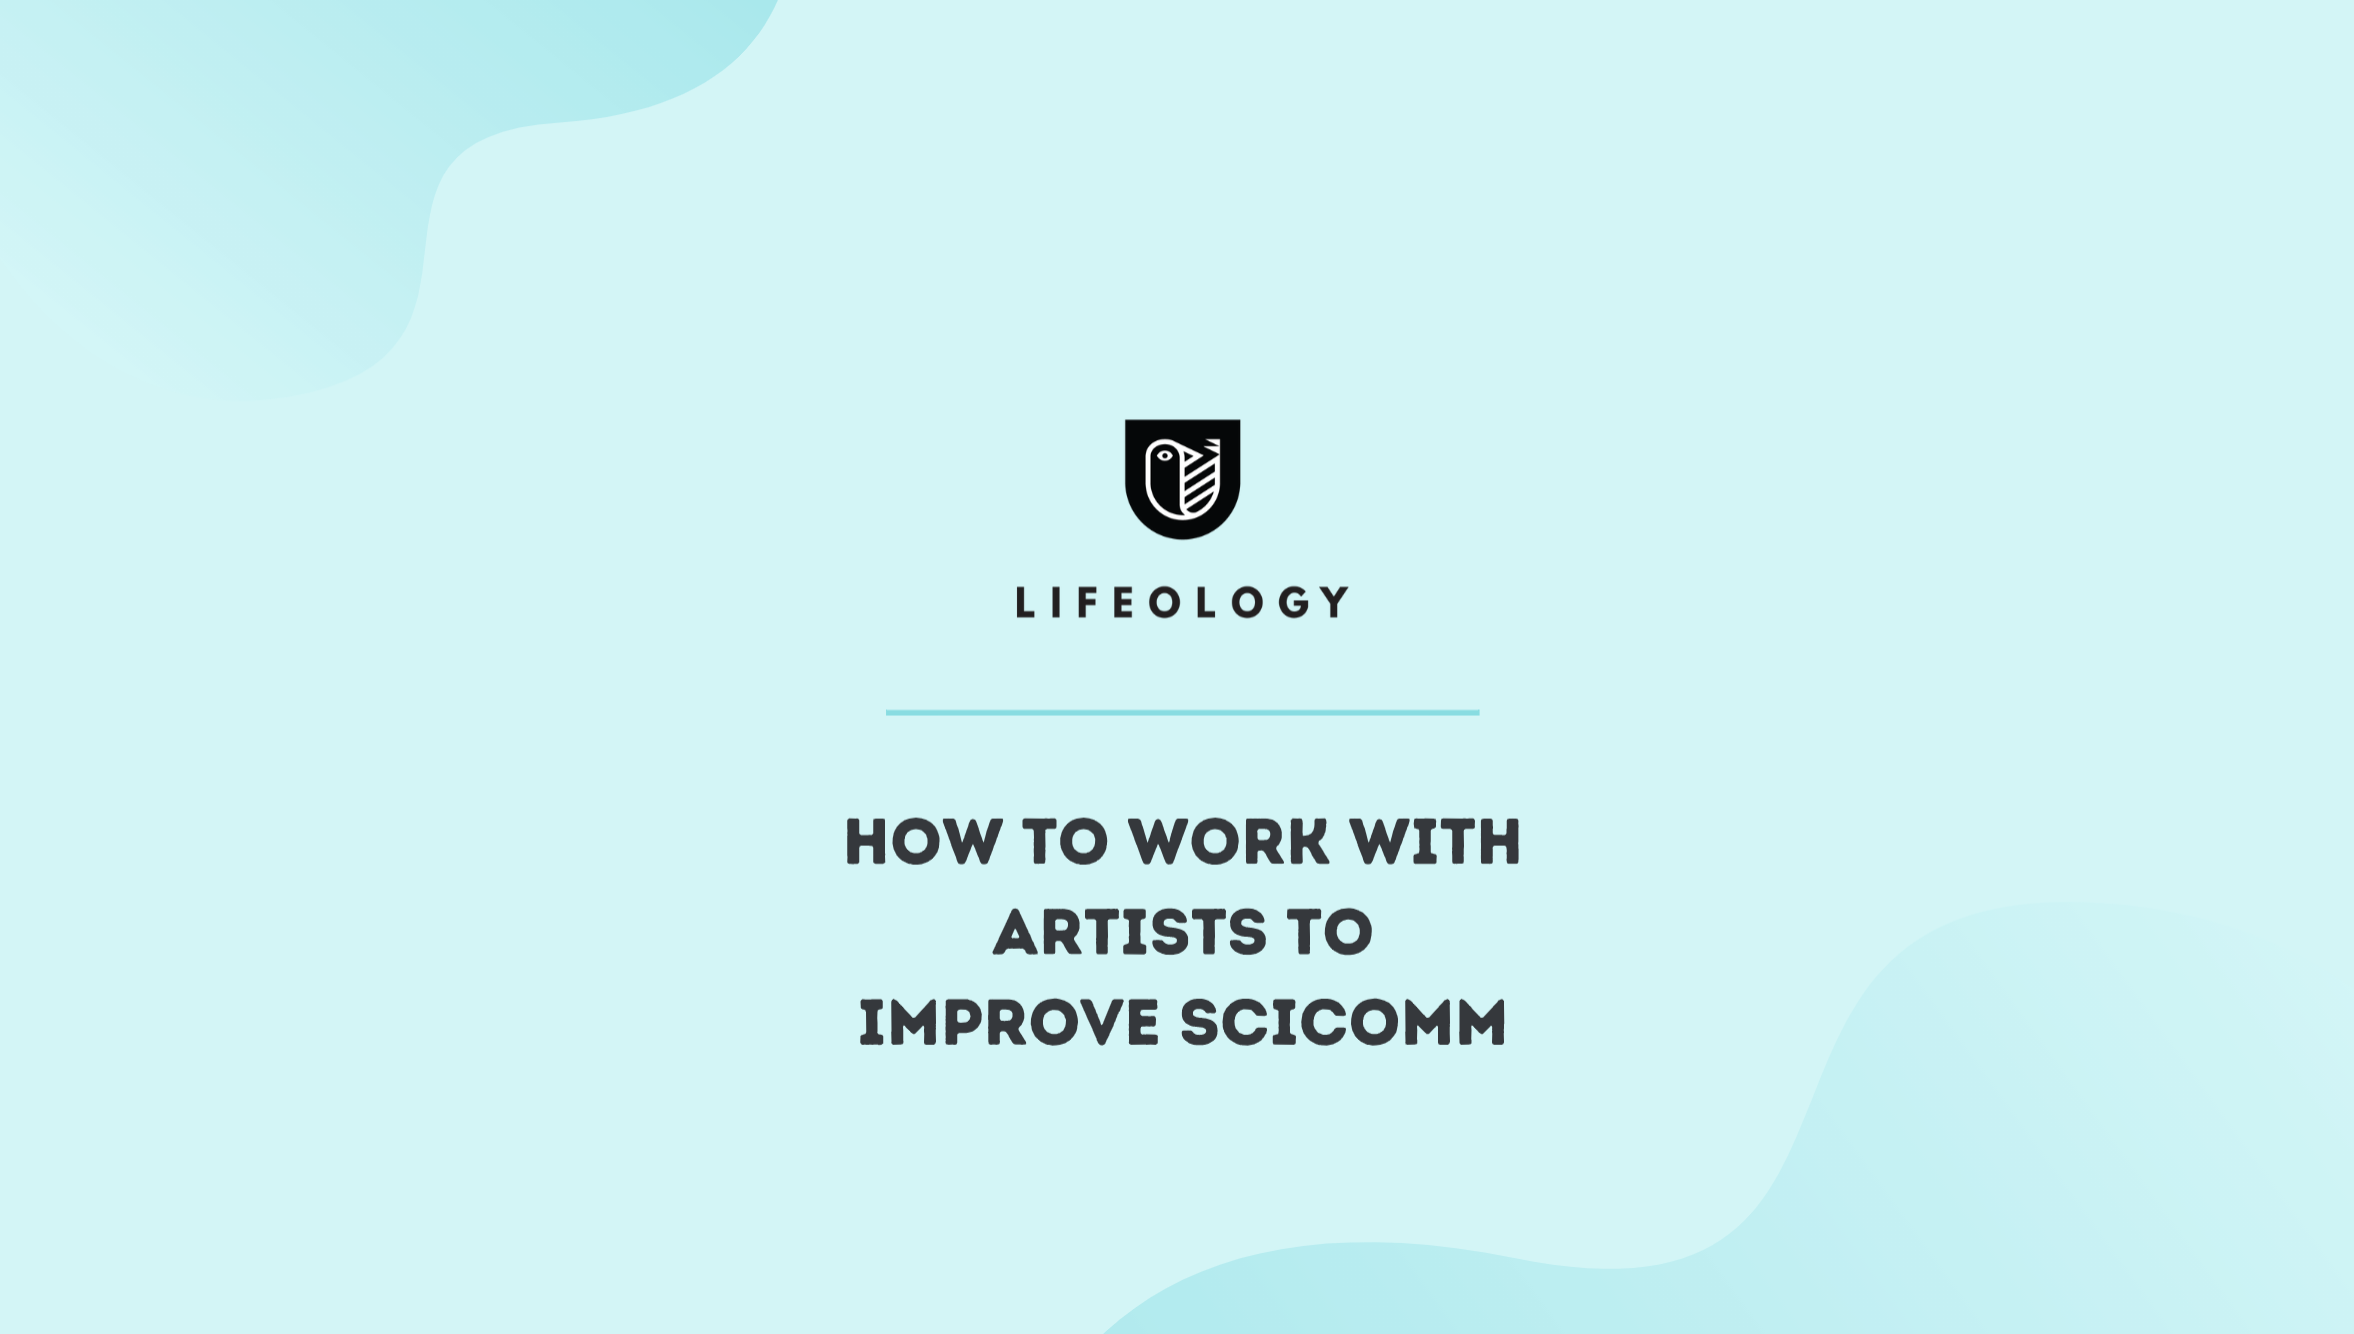 How to work with artists to improve scicomm